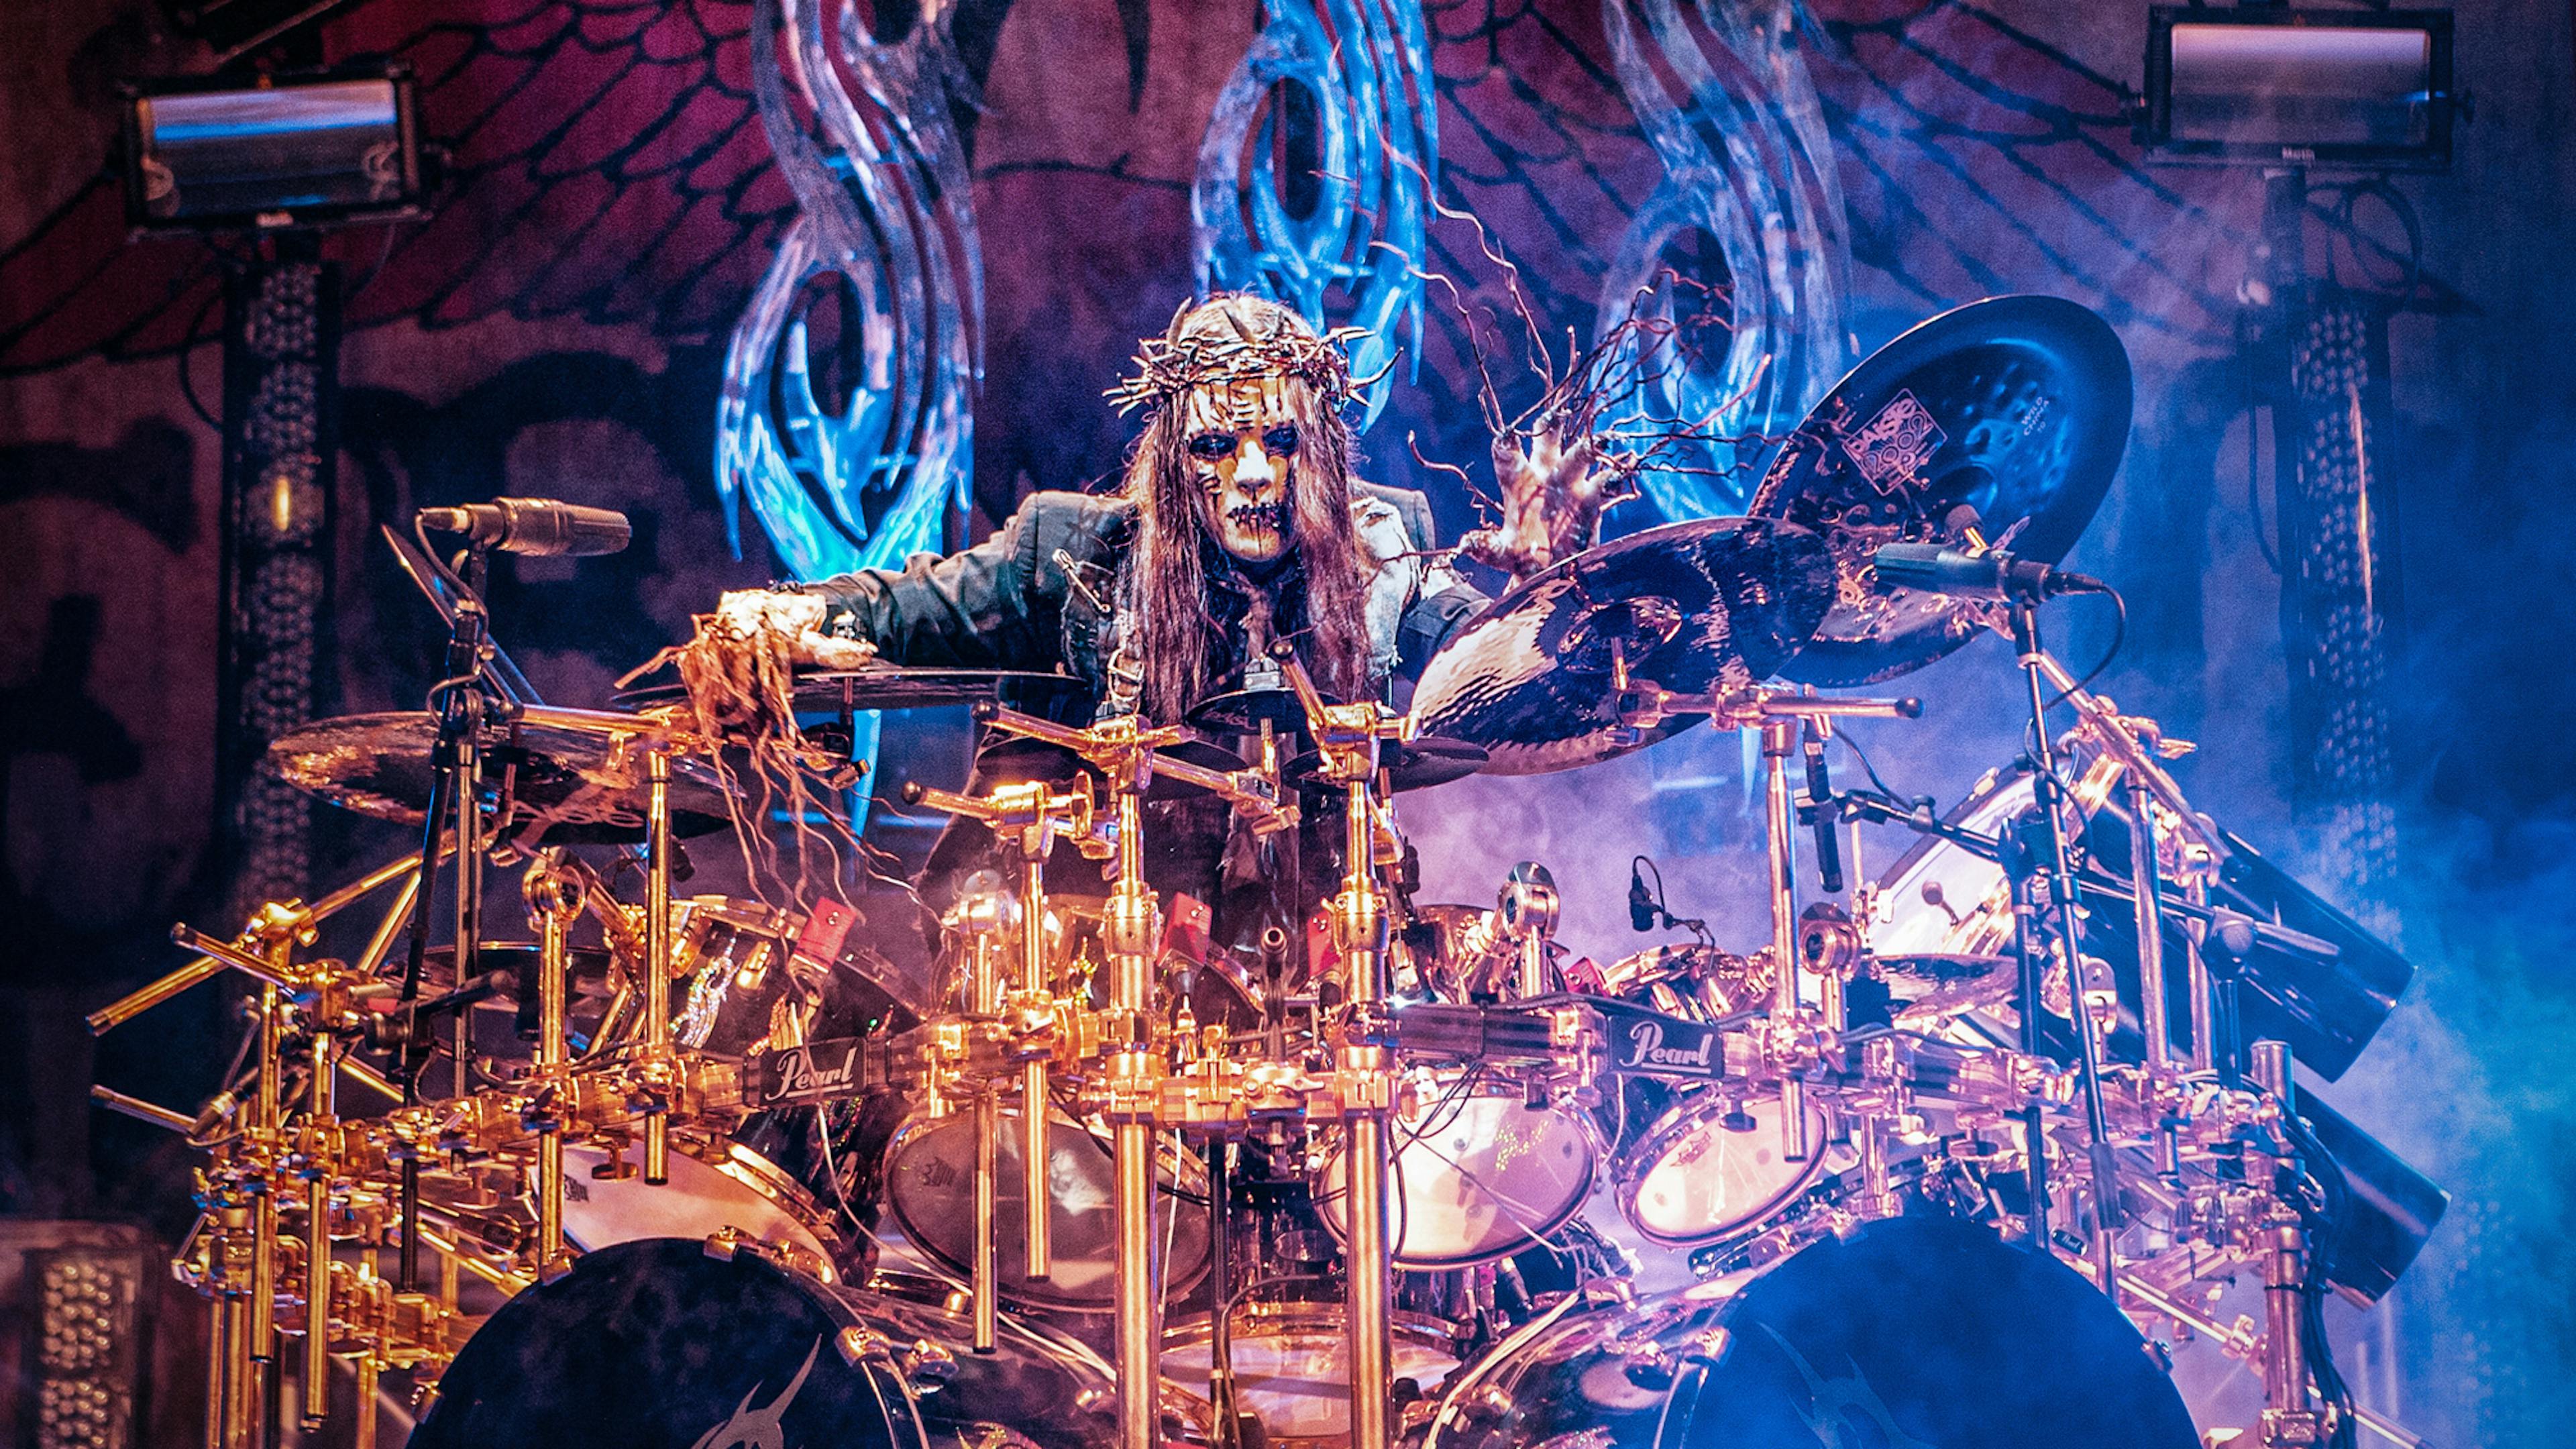 13 times Joey Jordison proved he was the best of the best